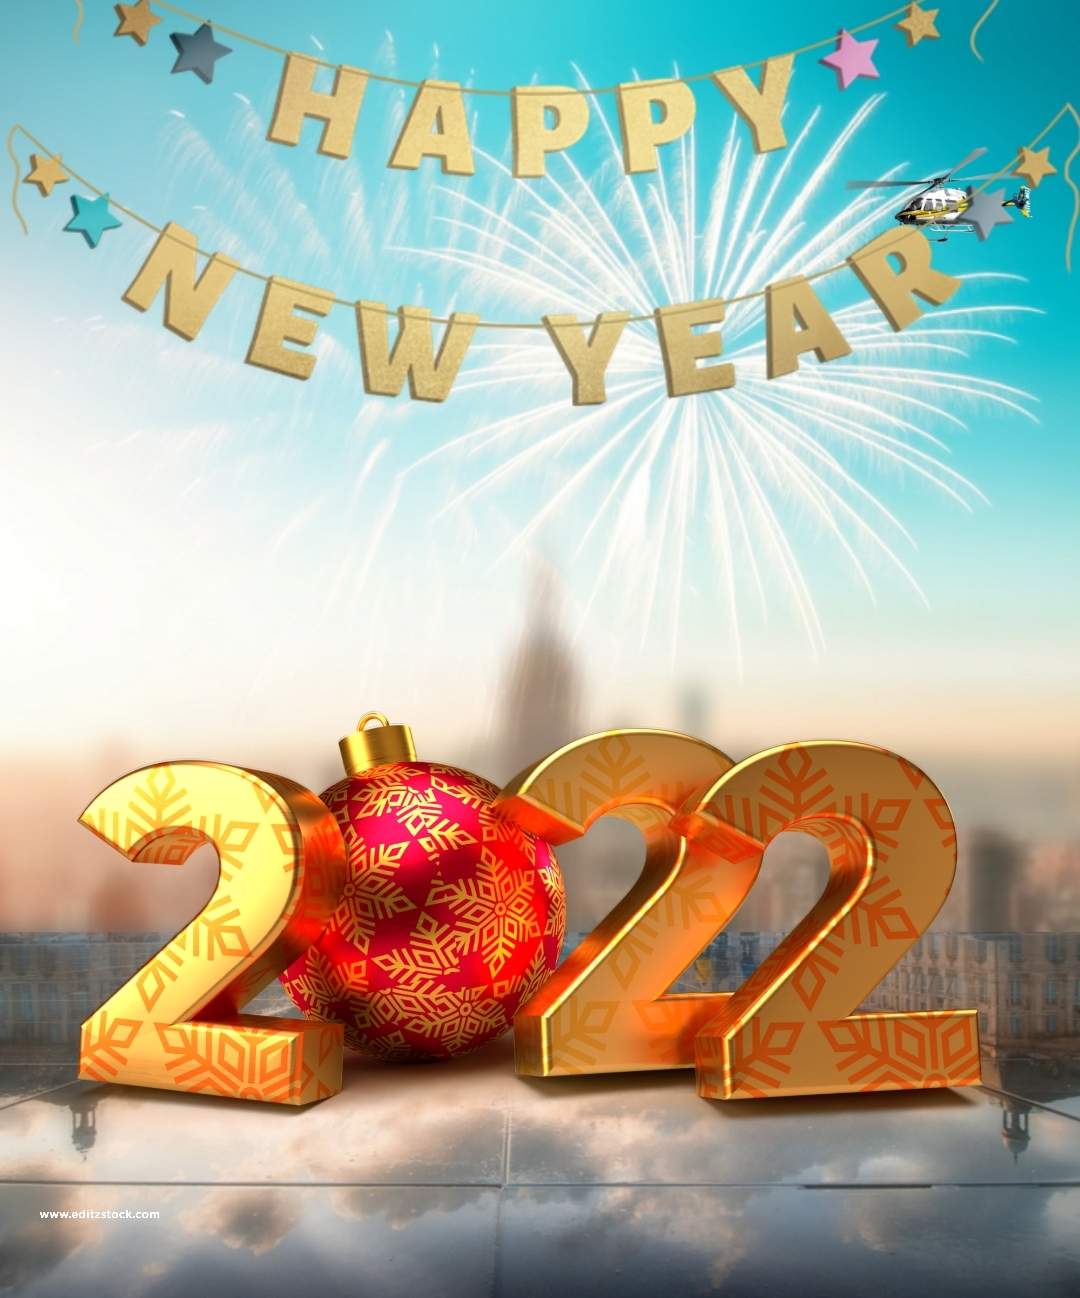 2022 new year 3d backgrounds |2022 happy new year background